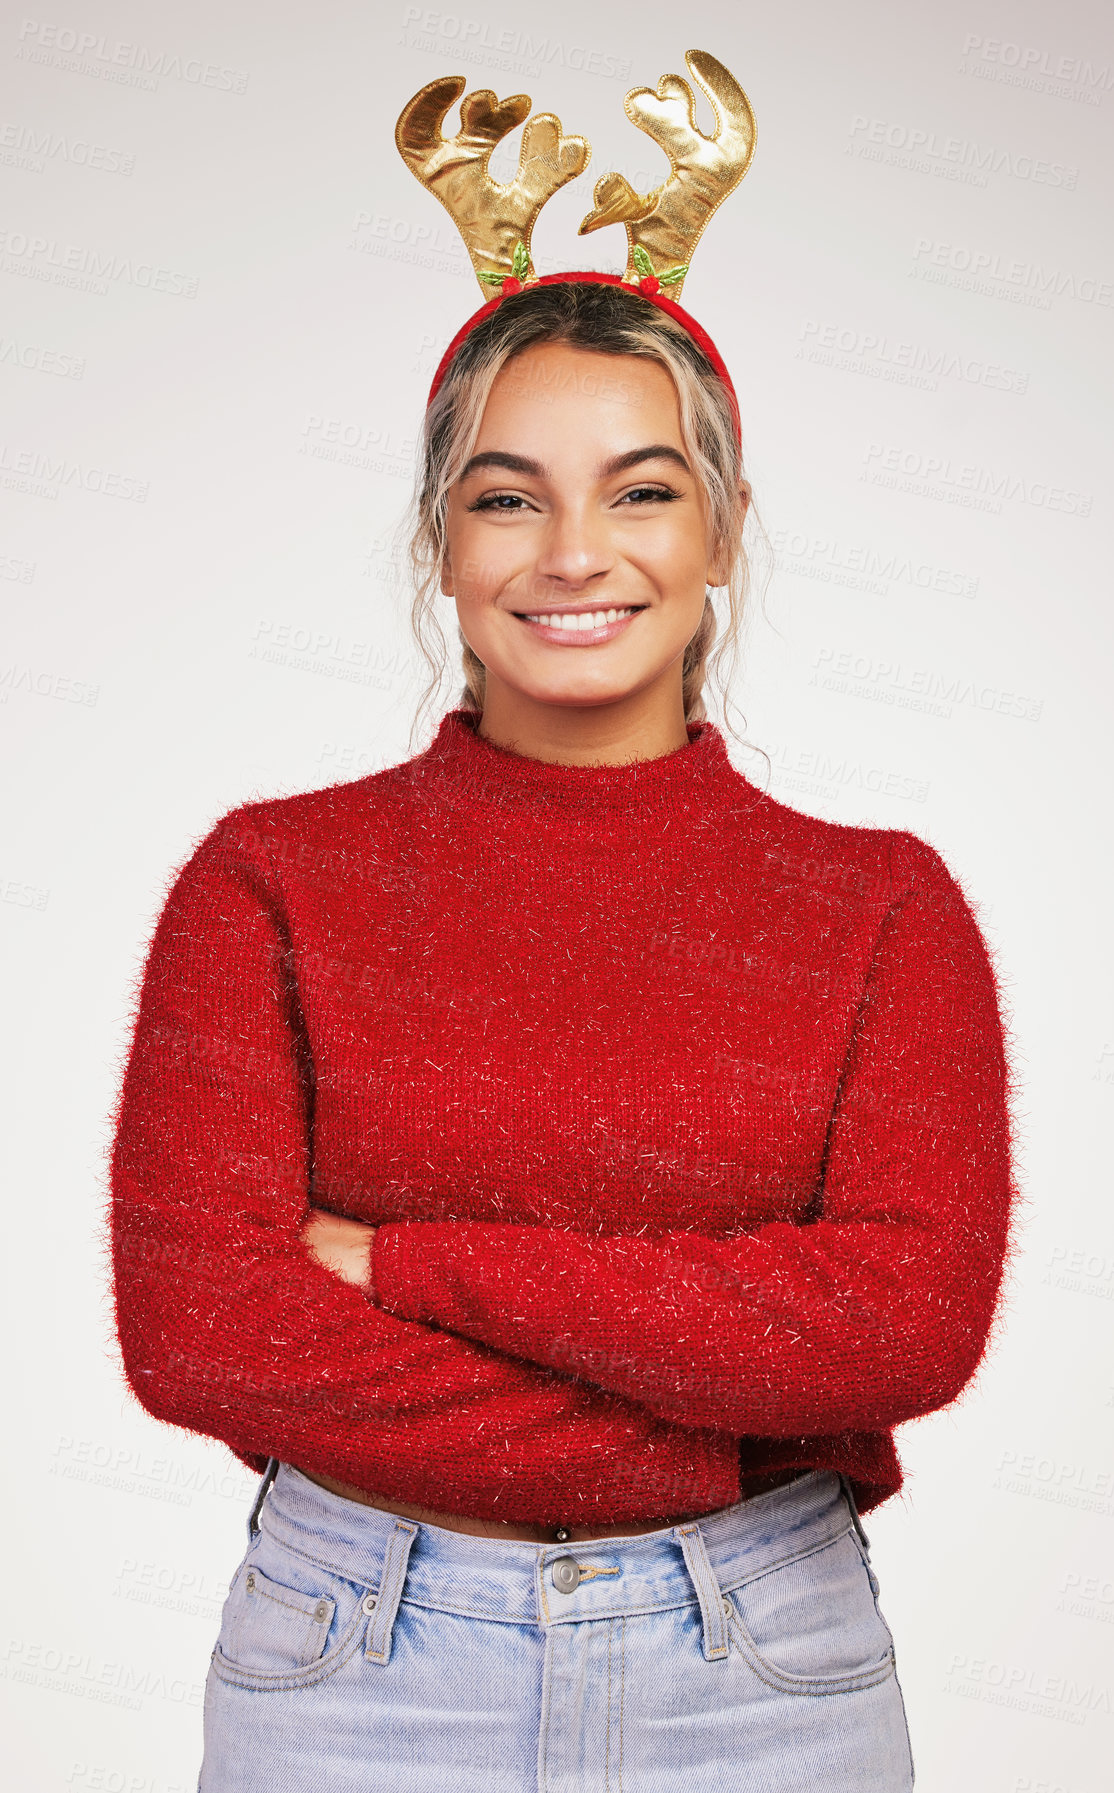 Buy stock photo Studio shot of a young woman wearing a reindeer headwear against a grey background